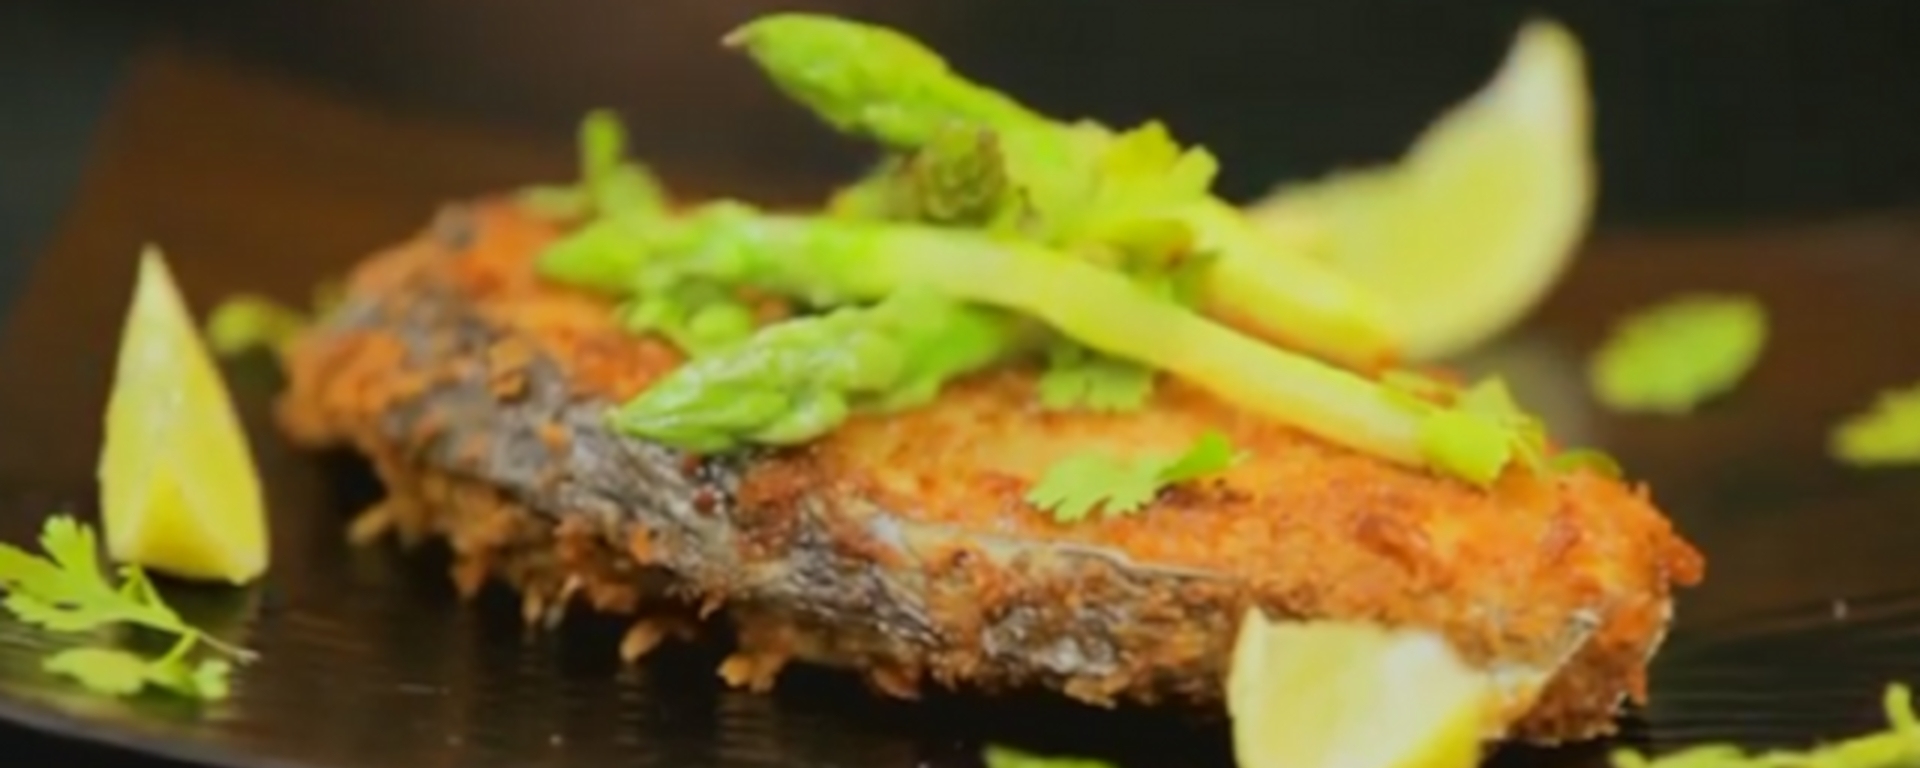 LuvMyRecipe.com - Pan Fried Crumbed Surmai With Asparagus Featured